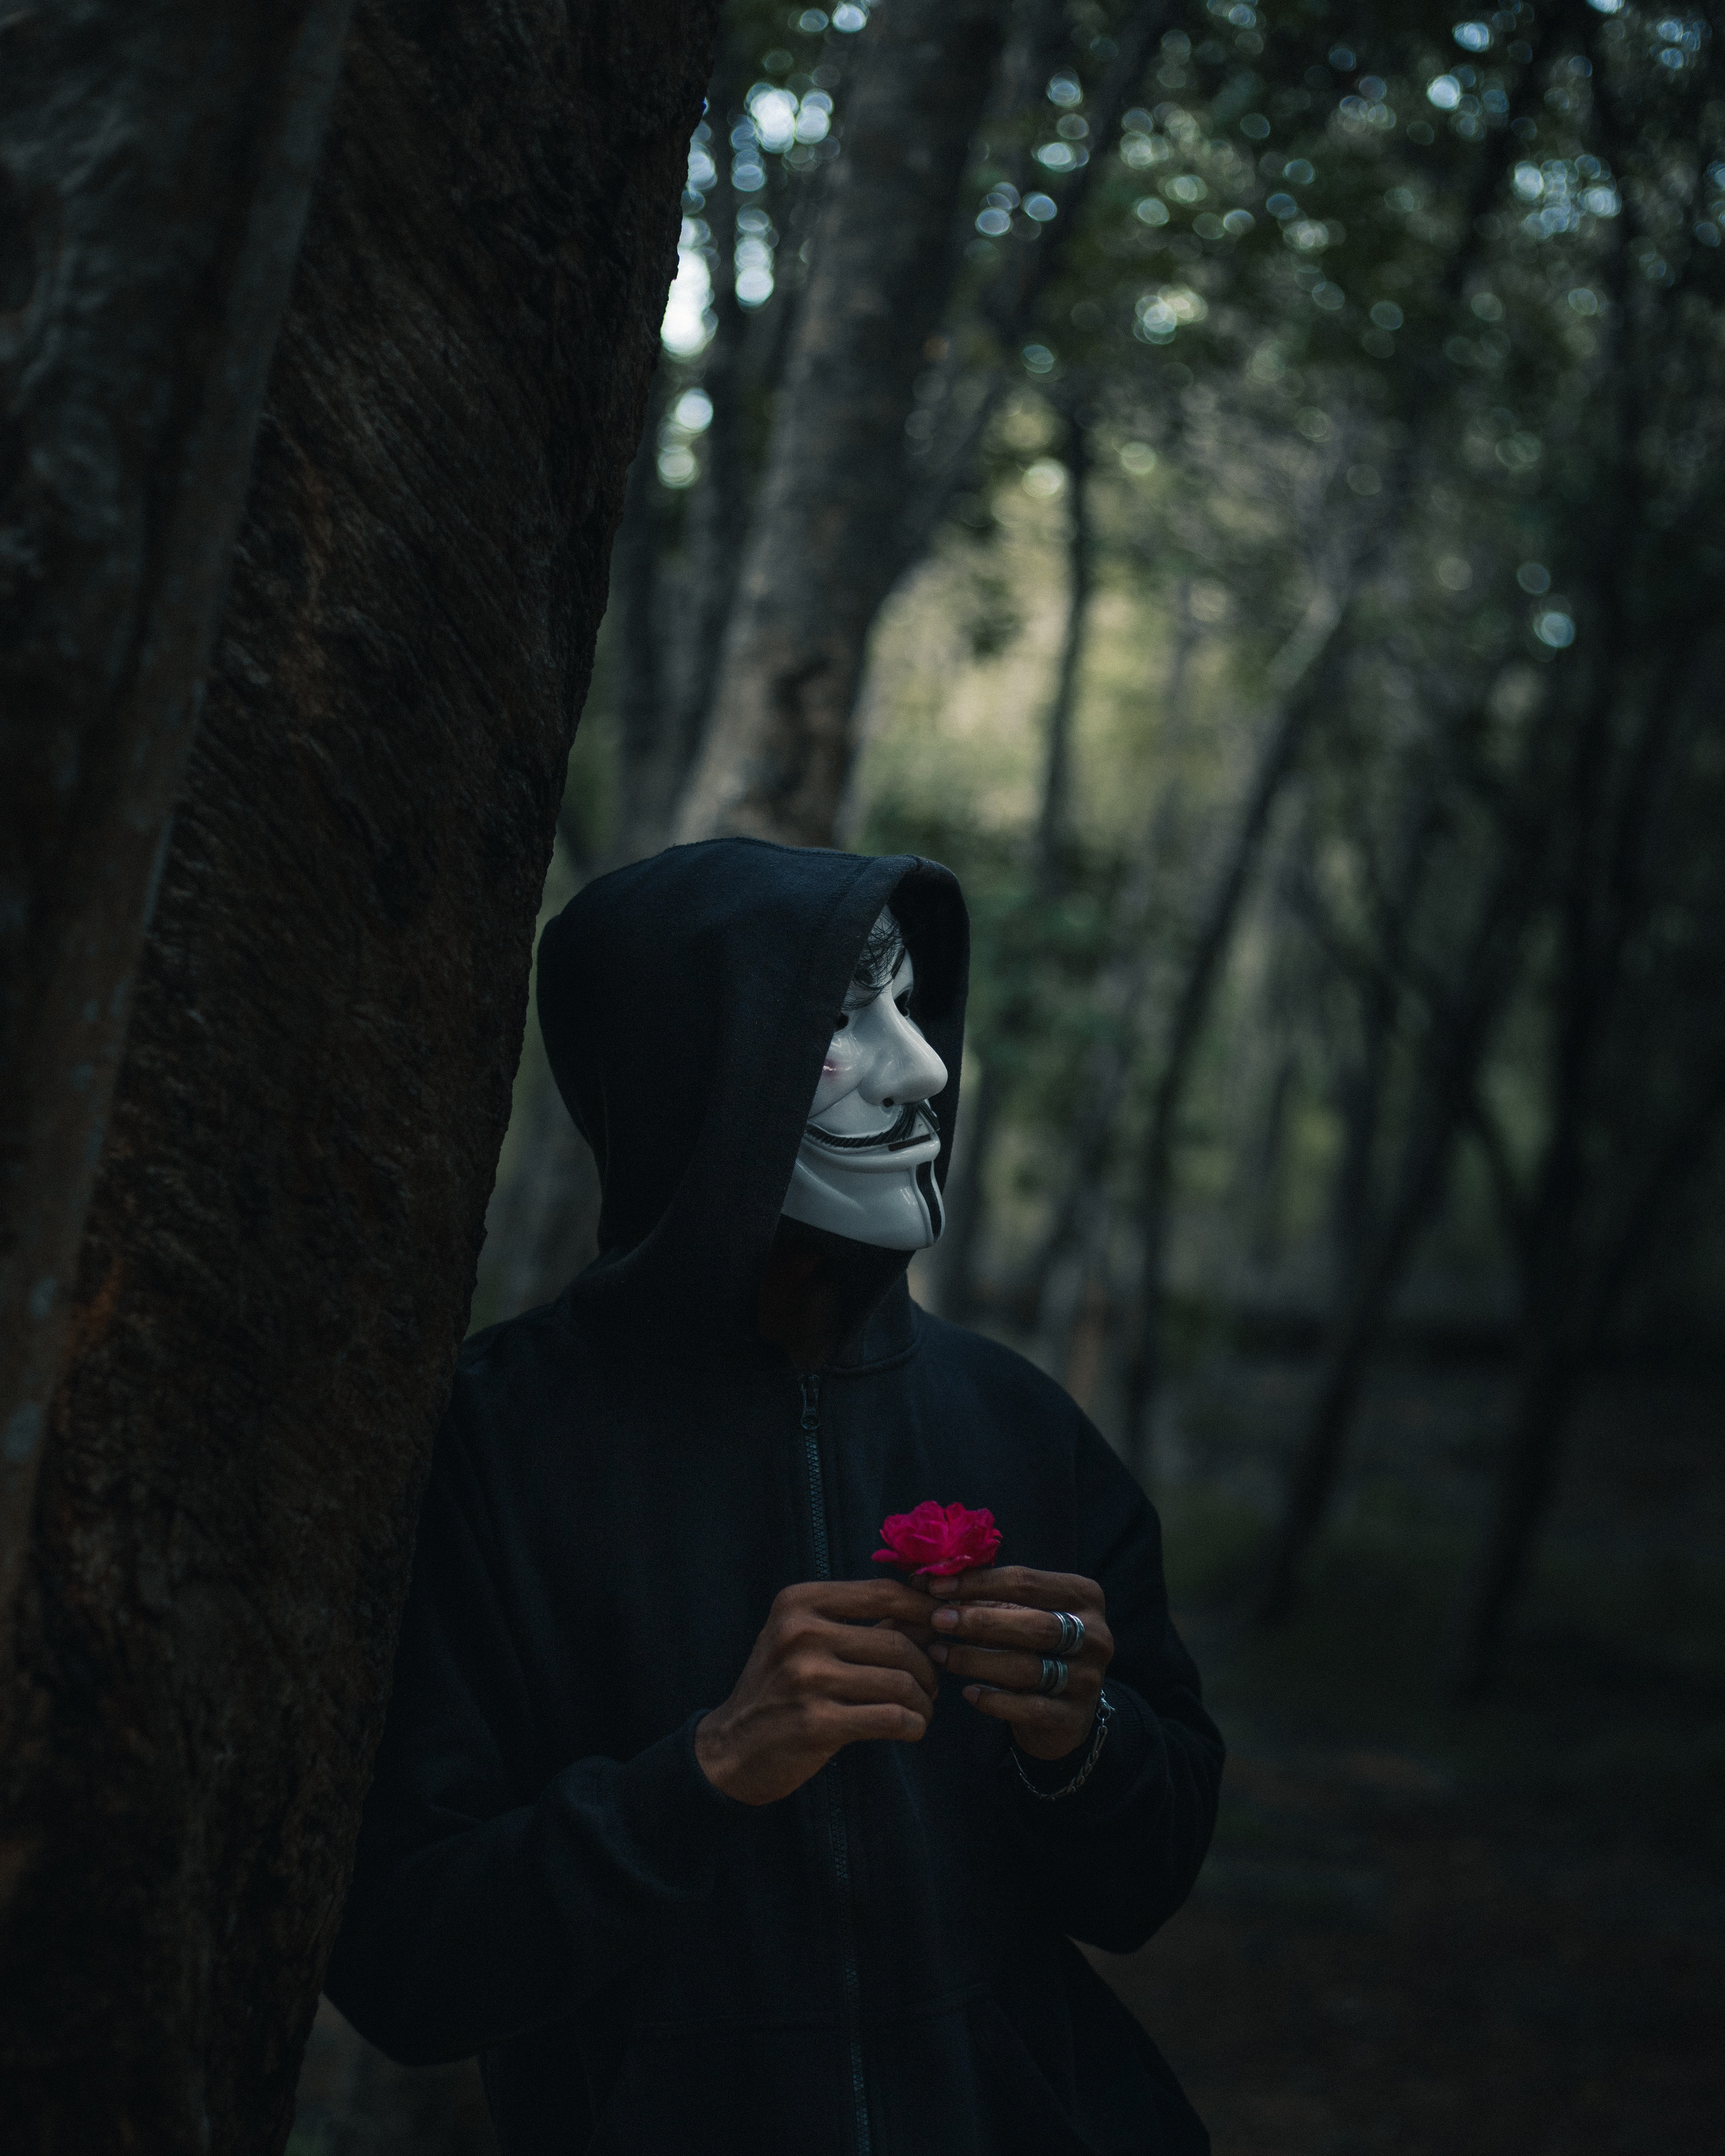 New Lock Screen Wallpapers anonymous, mask, miscellanea, miscellaneous, forest, human, person, hood